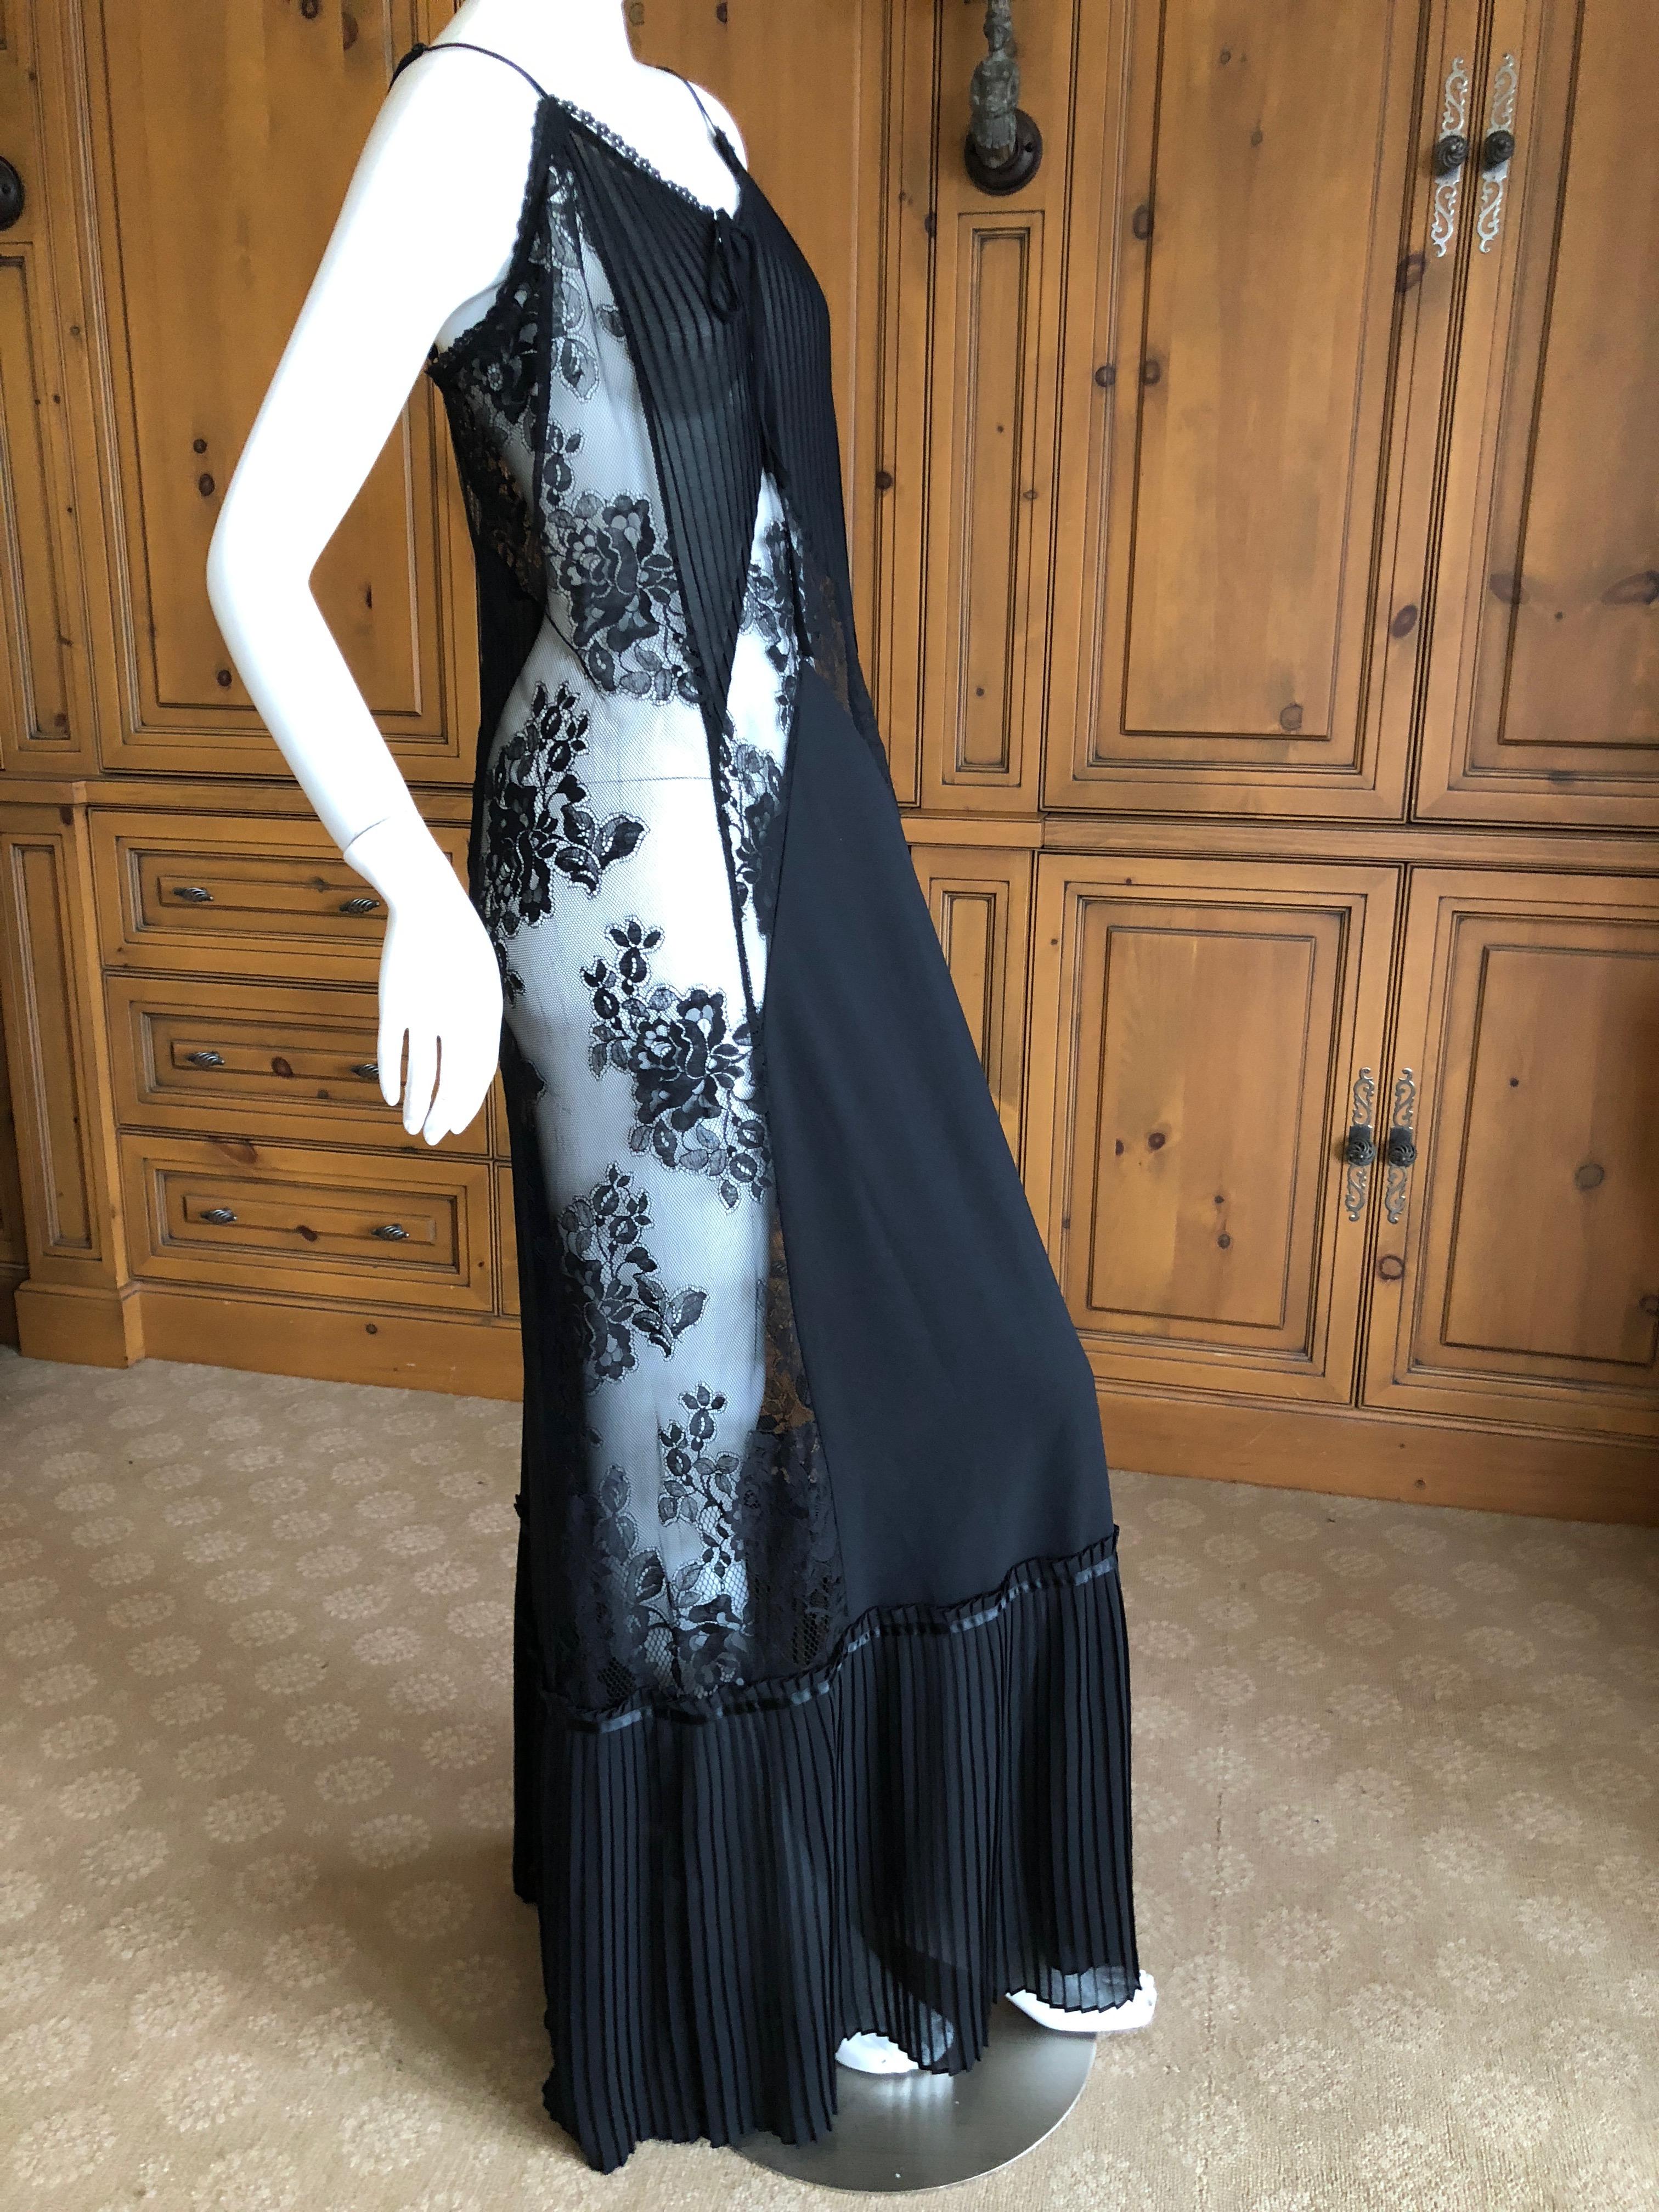 Alexander McQueen for McQ  Long Sheer Black Lace Dress
Sheer, there is no slip.
 Size L 
Bust 38